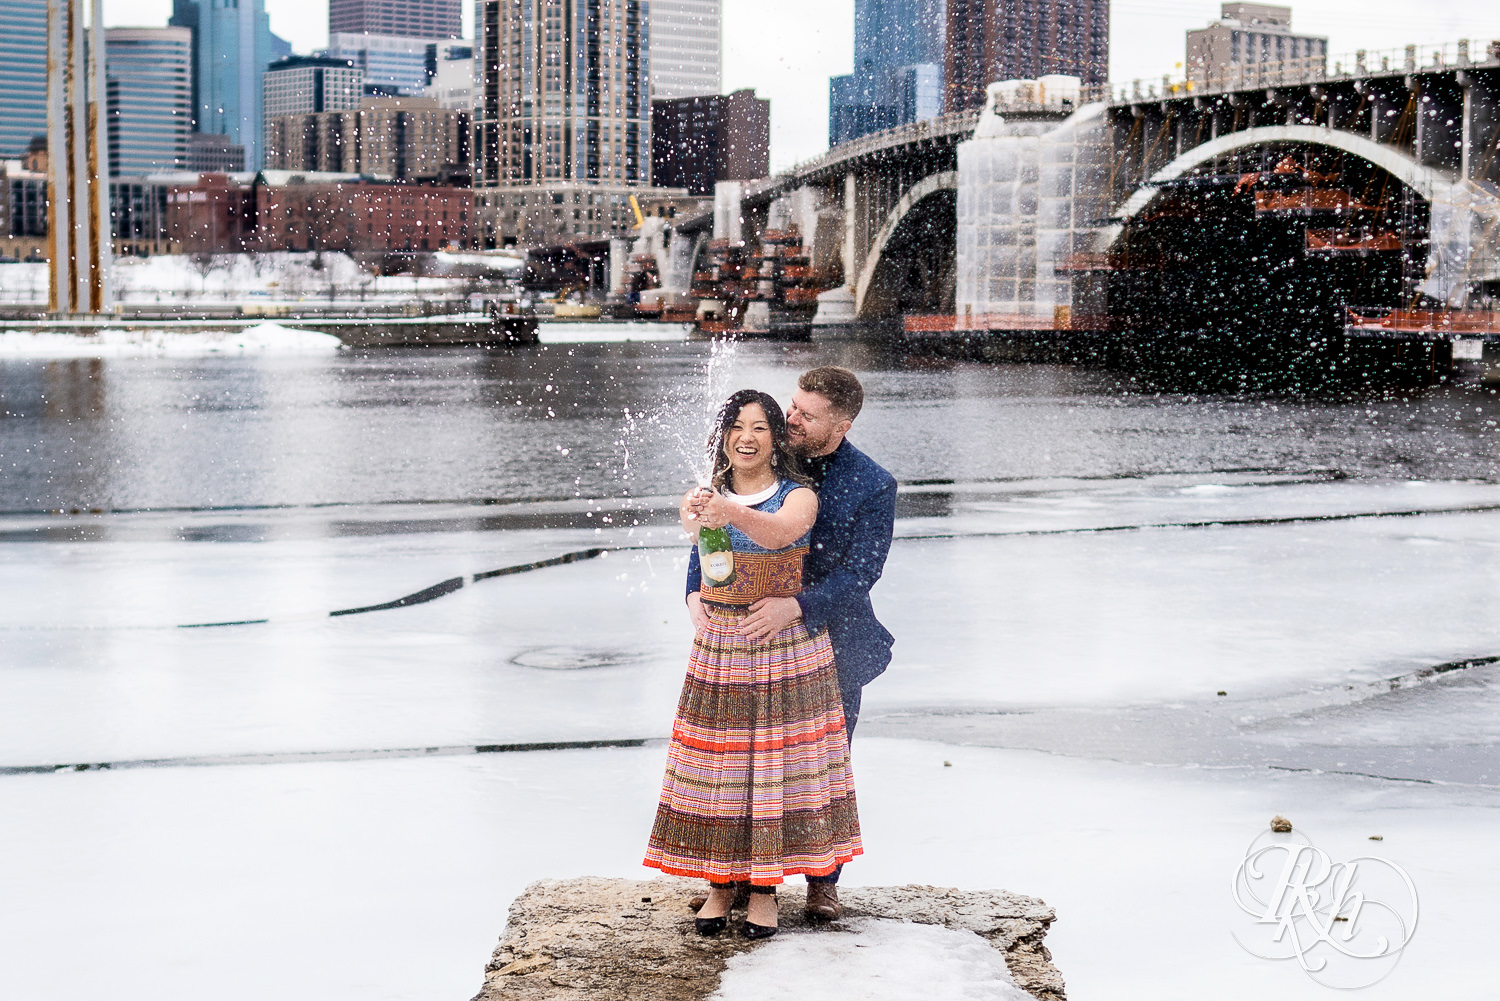 Man and Hmong woman spray champagne in Saint Anthony Main in Minneapolis, Minnesota with city in the background.